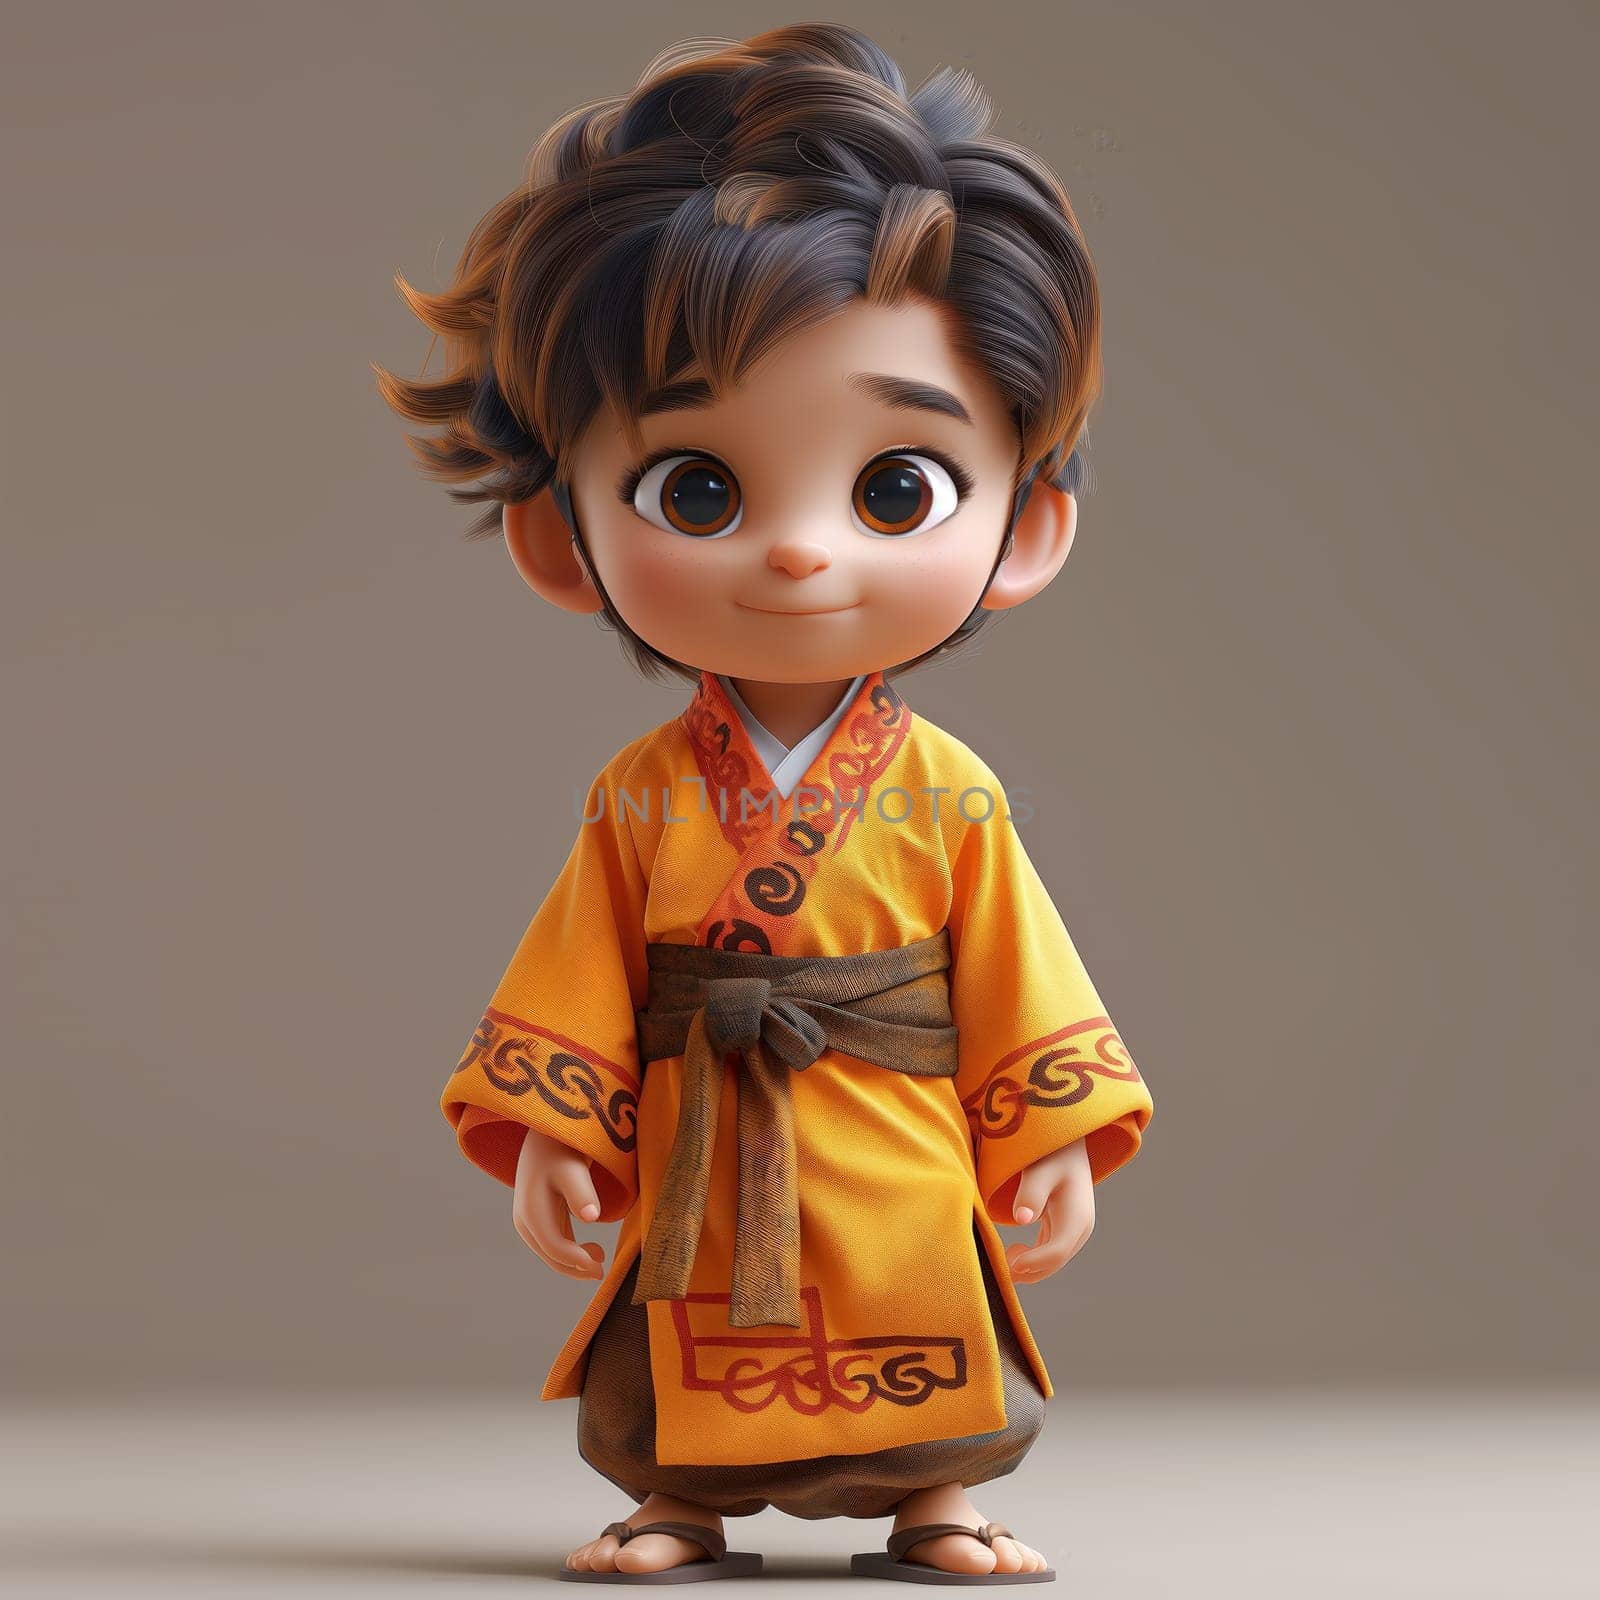 Cartoon, 3D boy in national traditional Asian attire. Selective focus.